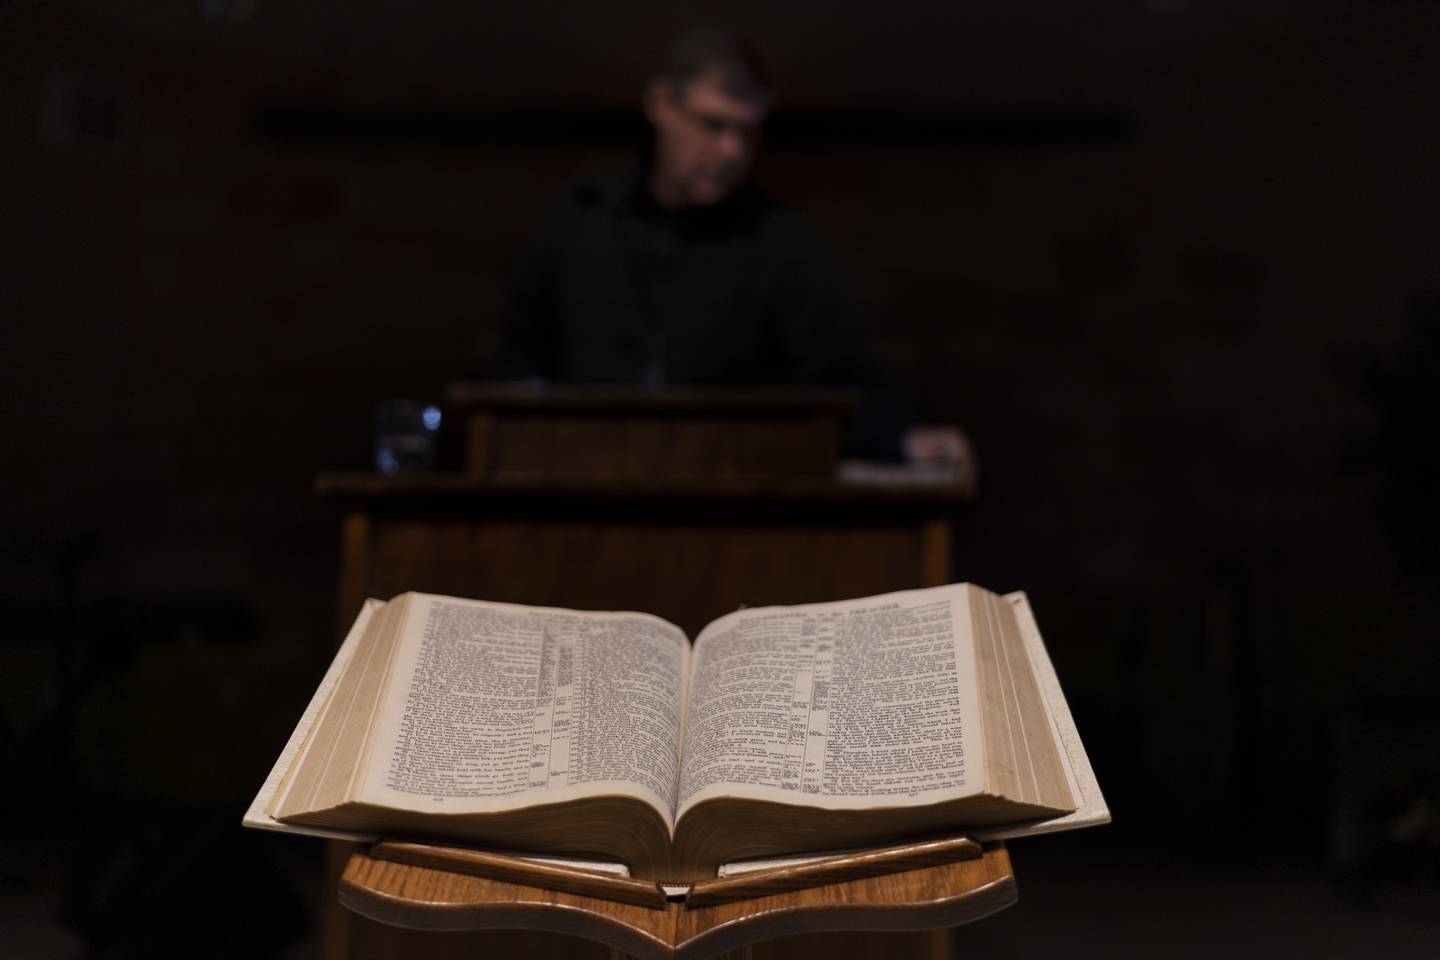 A Bible sits open as Pastor Rick Mannon stands at the pulpit at Calvary Assembly of God in Wilson, Wis., Wednesday, Nov. 16, 2022. Mannon's church is an outpost in the culture wars tearing at America, and a haven for people who feel shoved aside by a changing nation. Homosexuality is seen as dangerous here. Abortion is evil. The specter of one-world government looms. "If Christians don't get involved in politics, then we shouldn't have a say," Mannon says. "We can't just let evil win." (AP Photo/David Goldman)